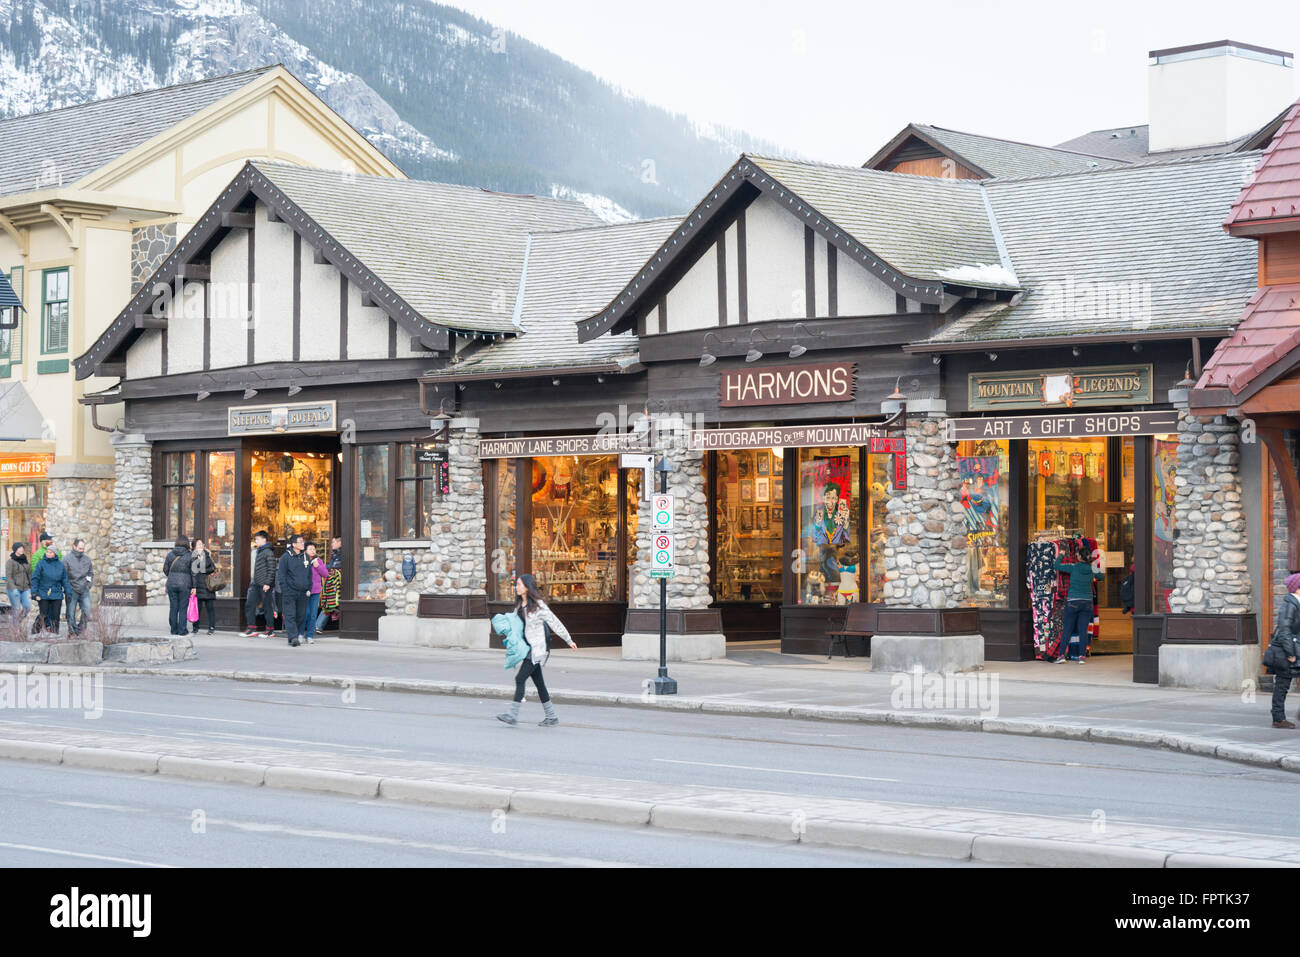 Shops on Banff Avenue Banff Canada including Harmons gift shop or store Stock Photo